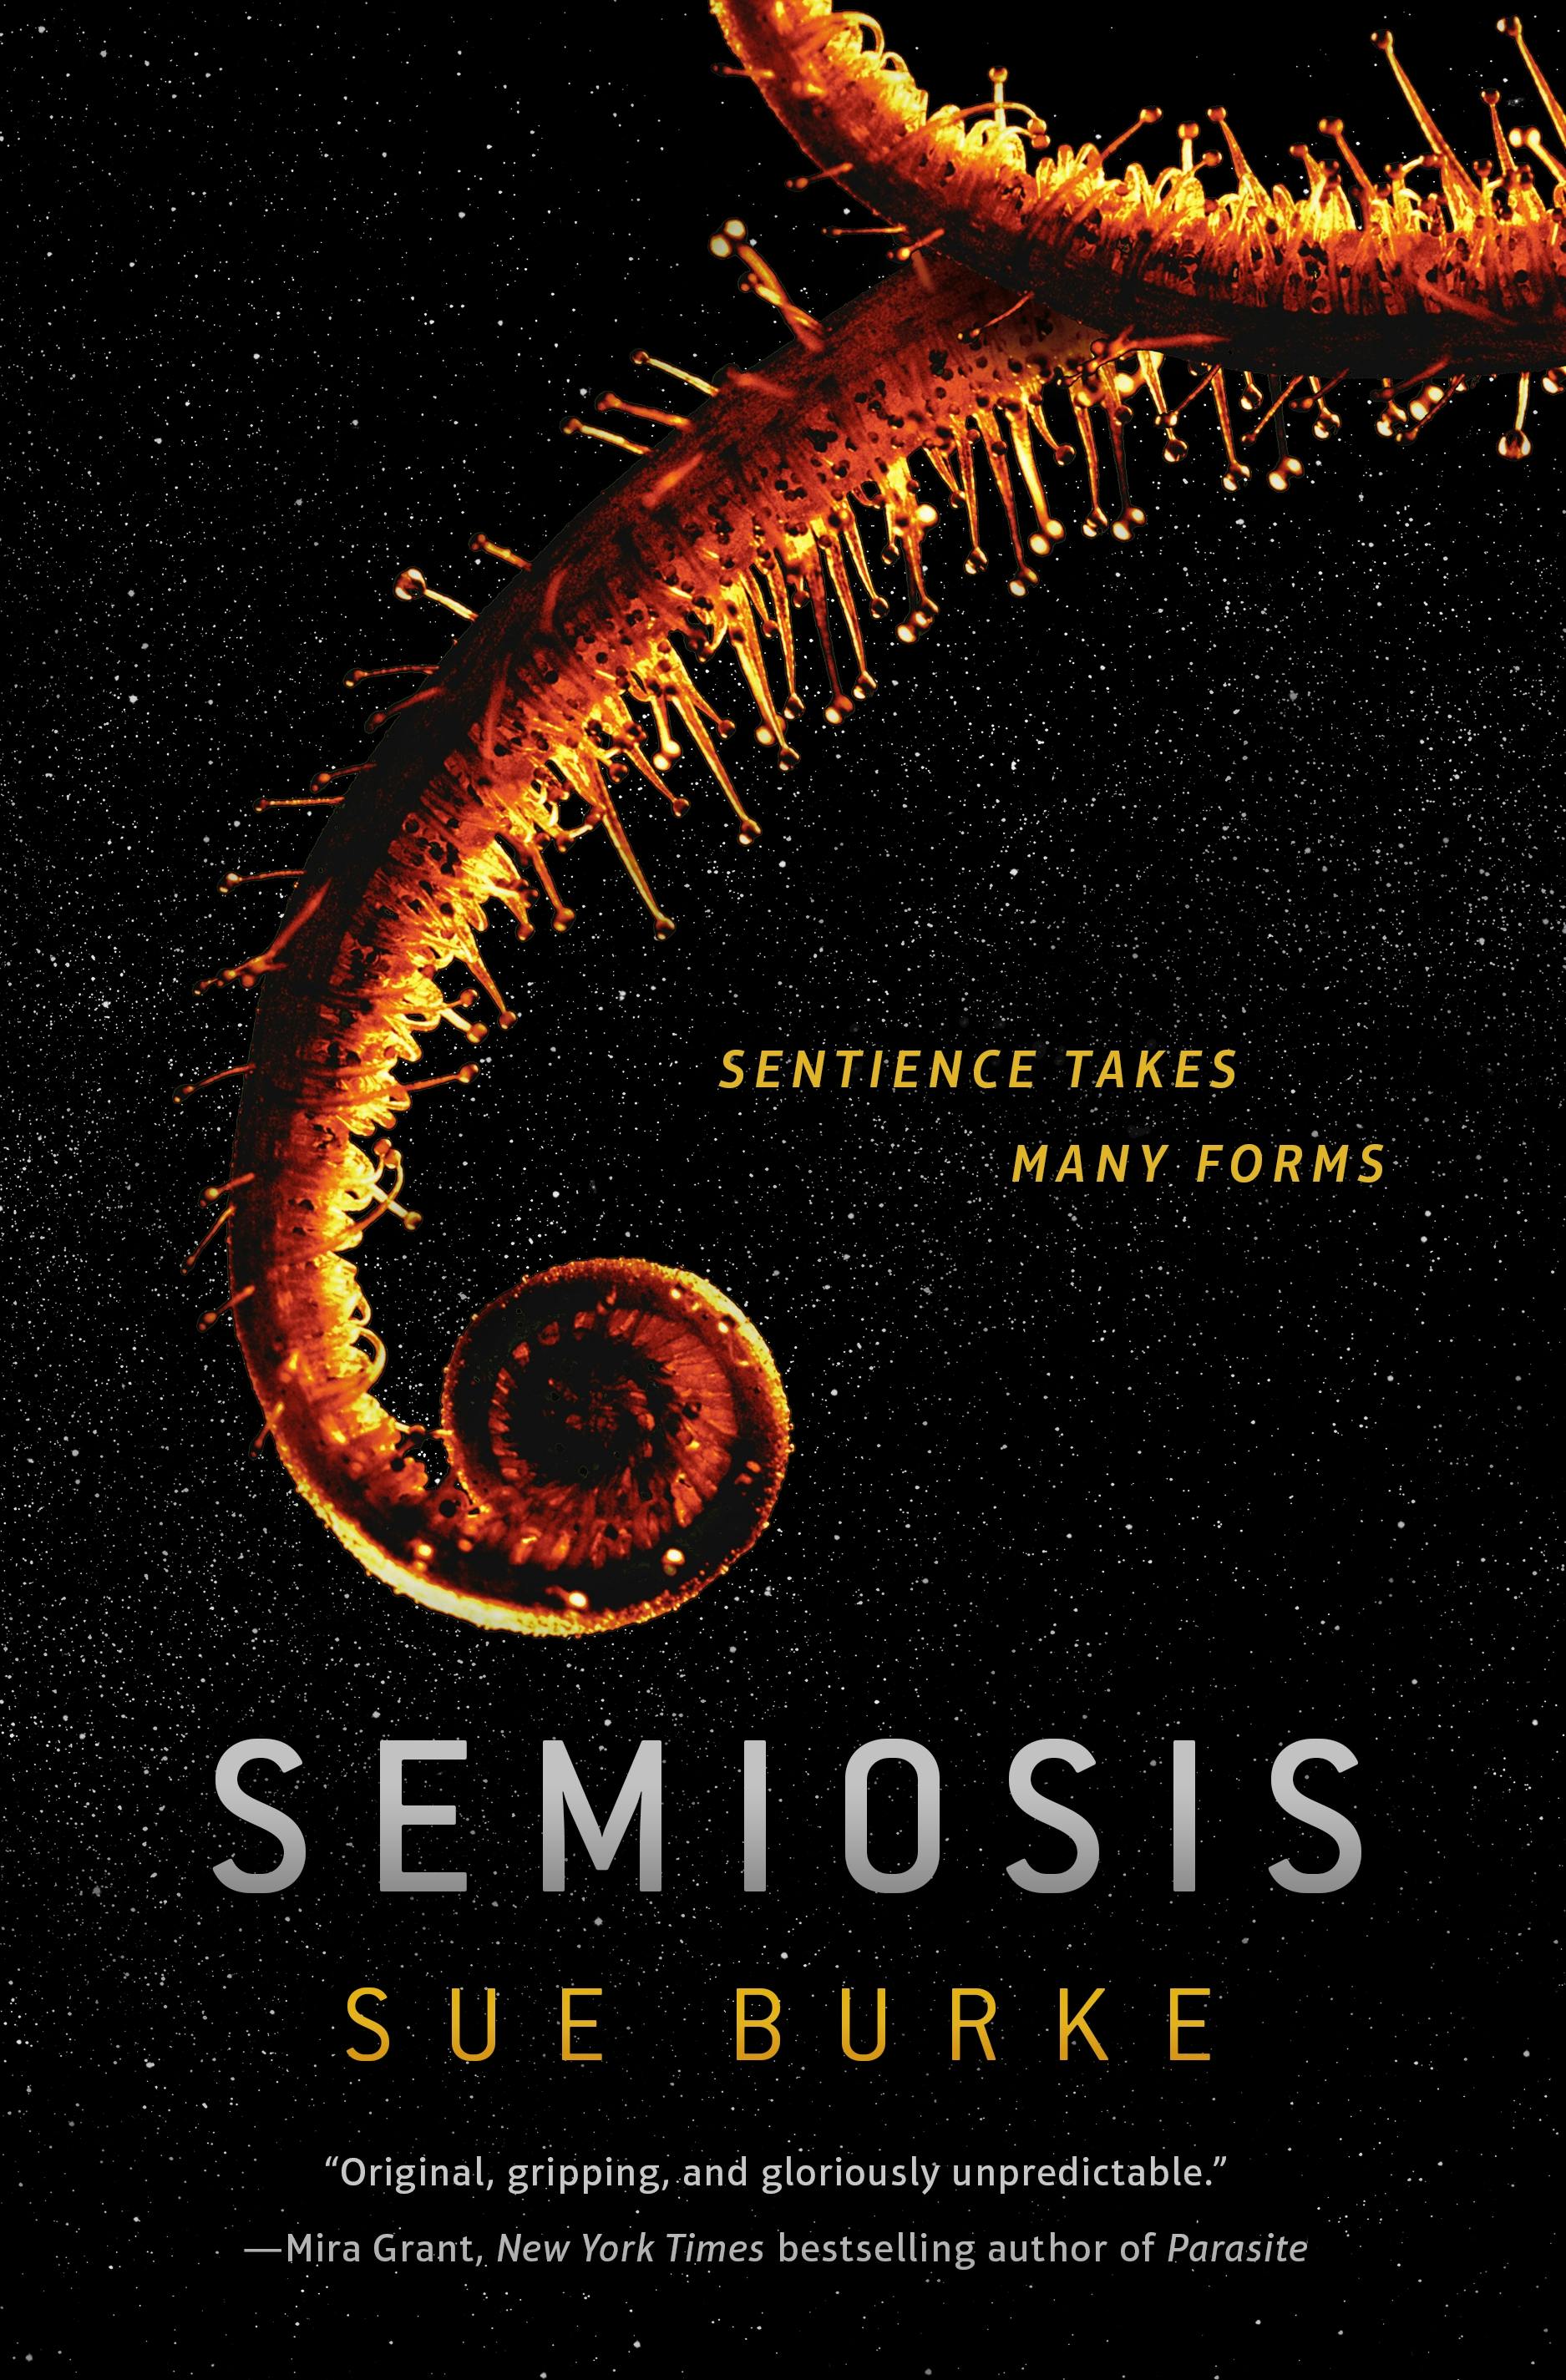 Cover for the book titled as: Semiosis